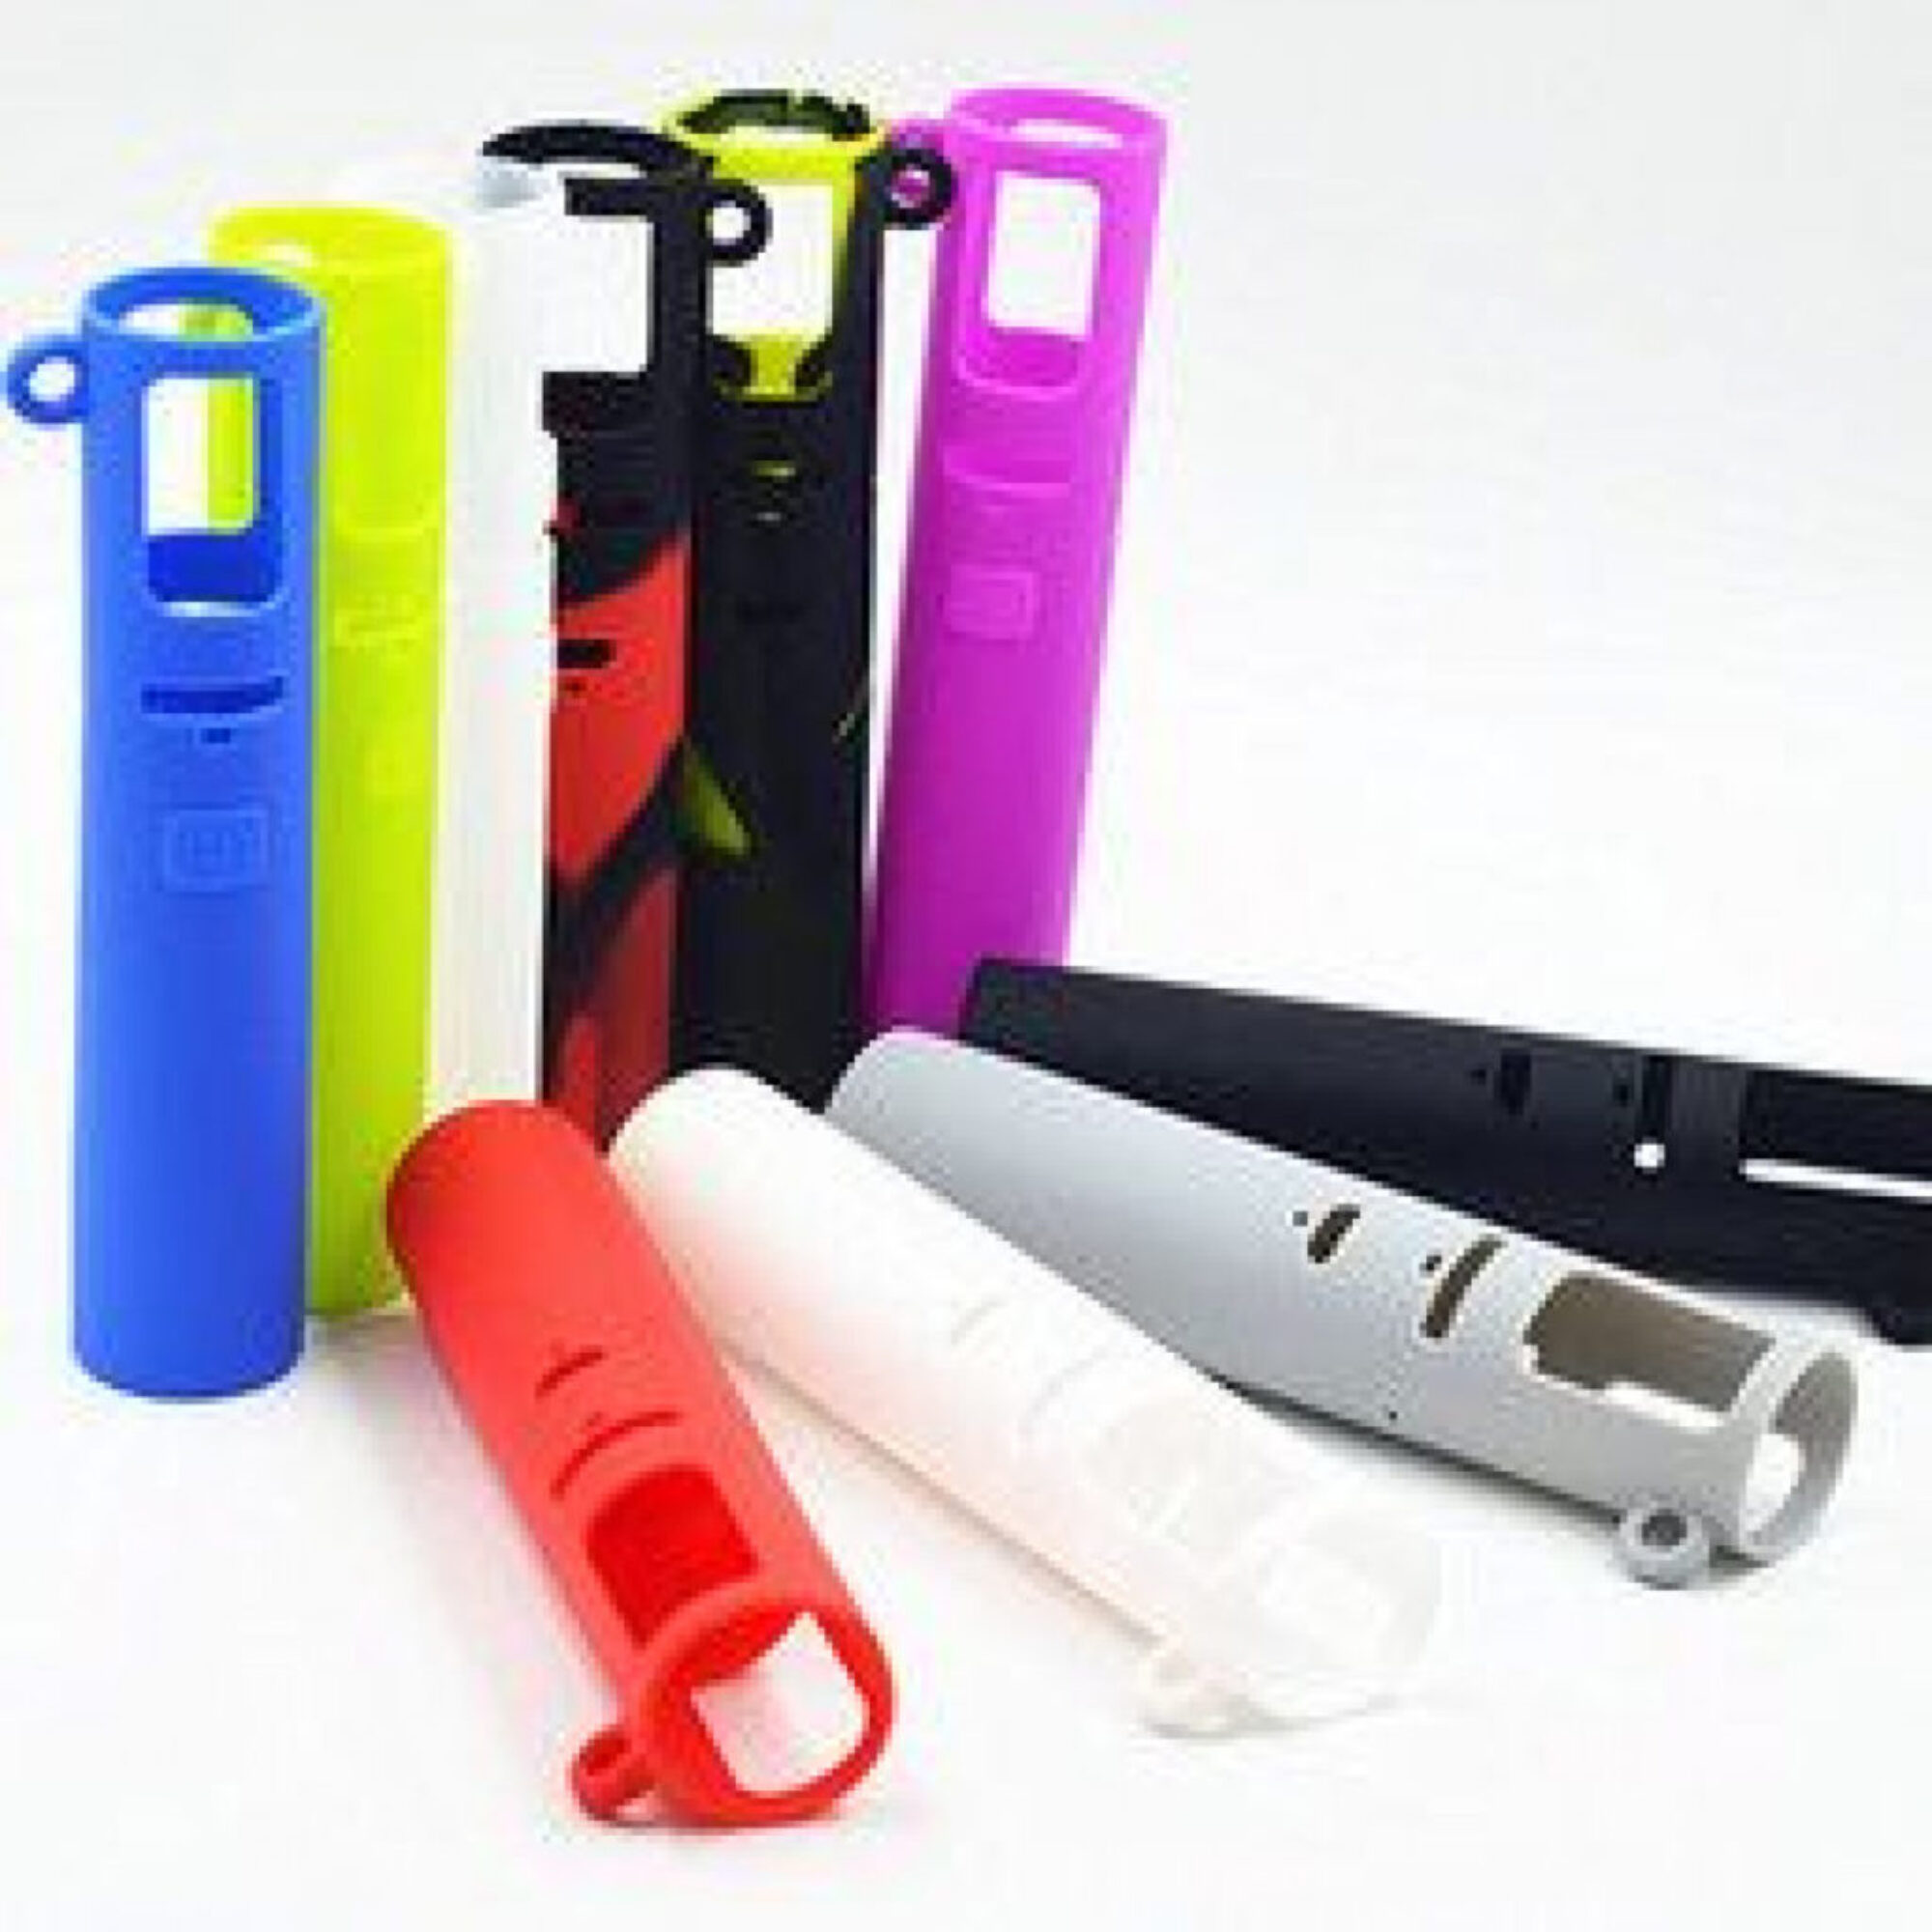 ijust-s-silicone-case-colorful-rubber-sleeve